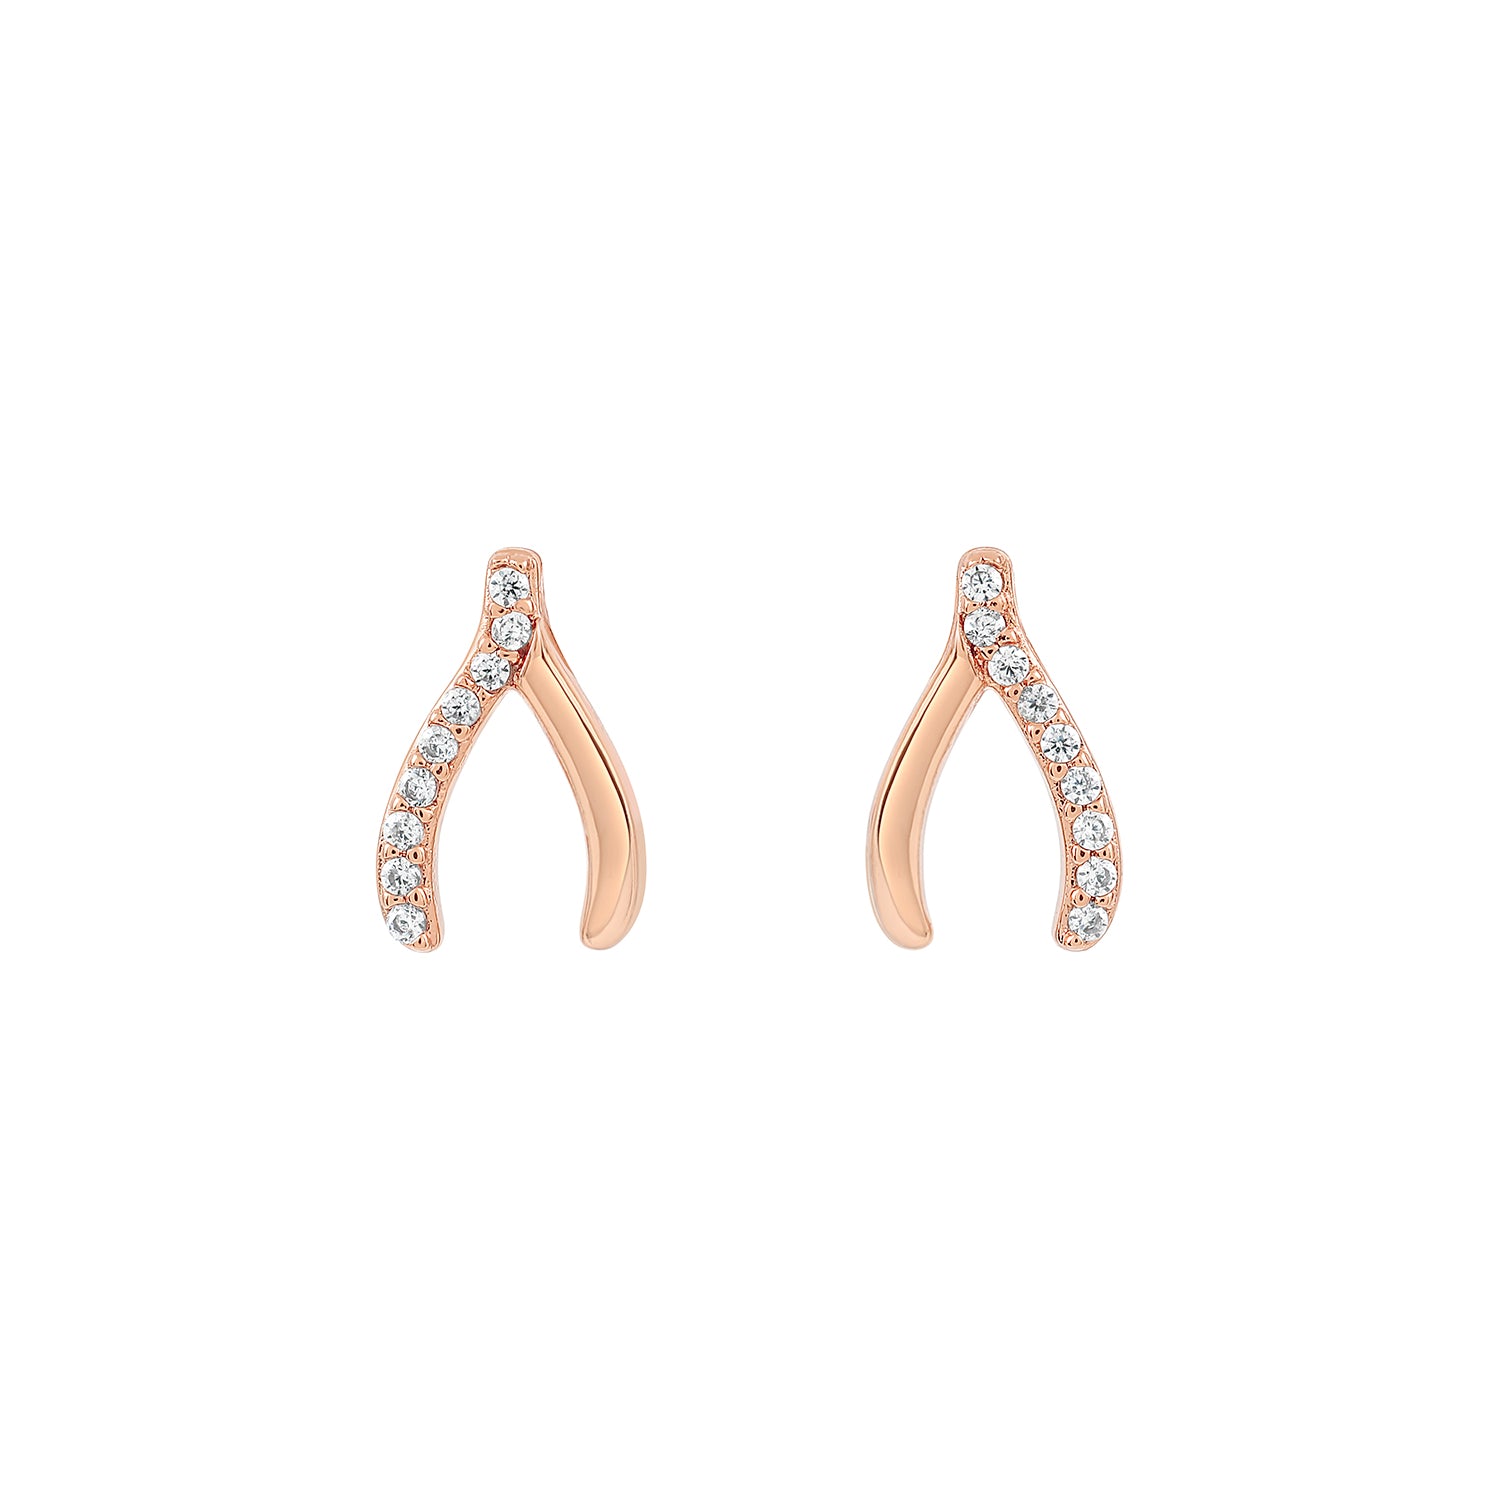 Elegant and statement earrings. Rose gold wishbone studs set with cubic zirconia stones.